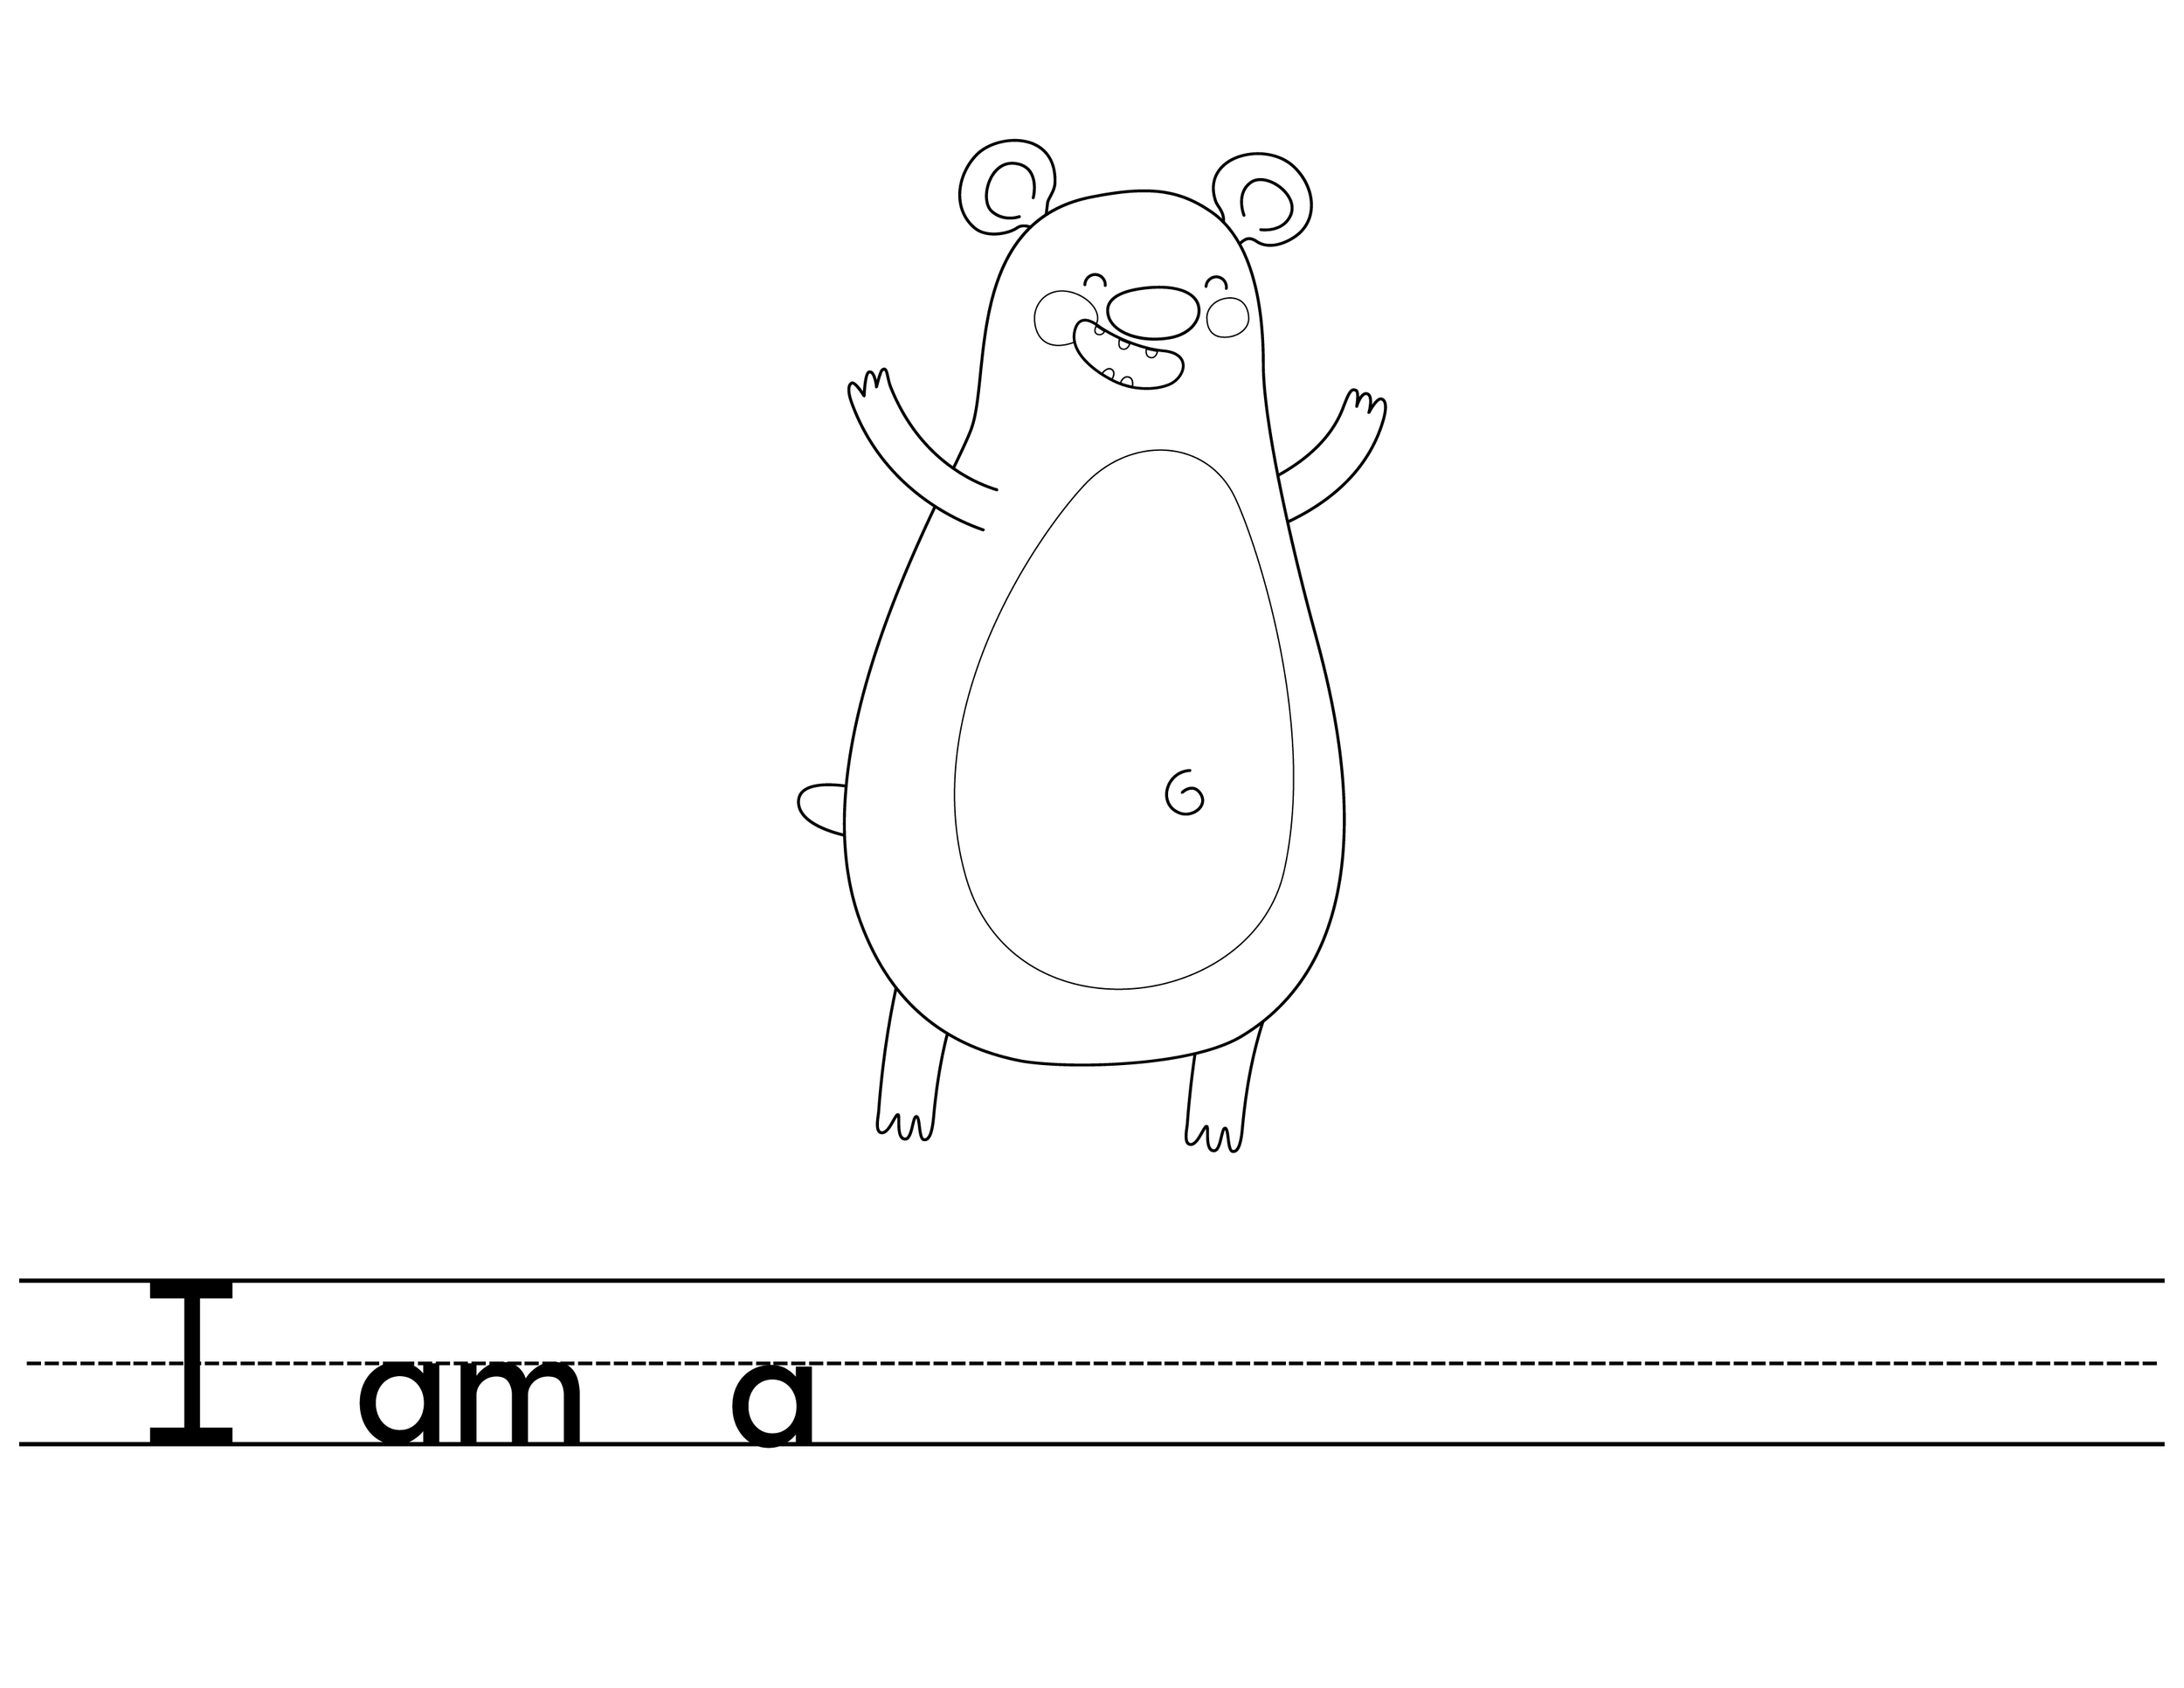 Writing This Is My Bear Solid Sentence Starter Page 8 BW copy-01.png